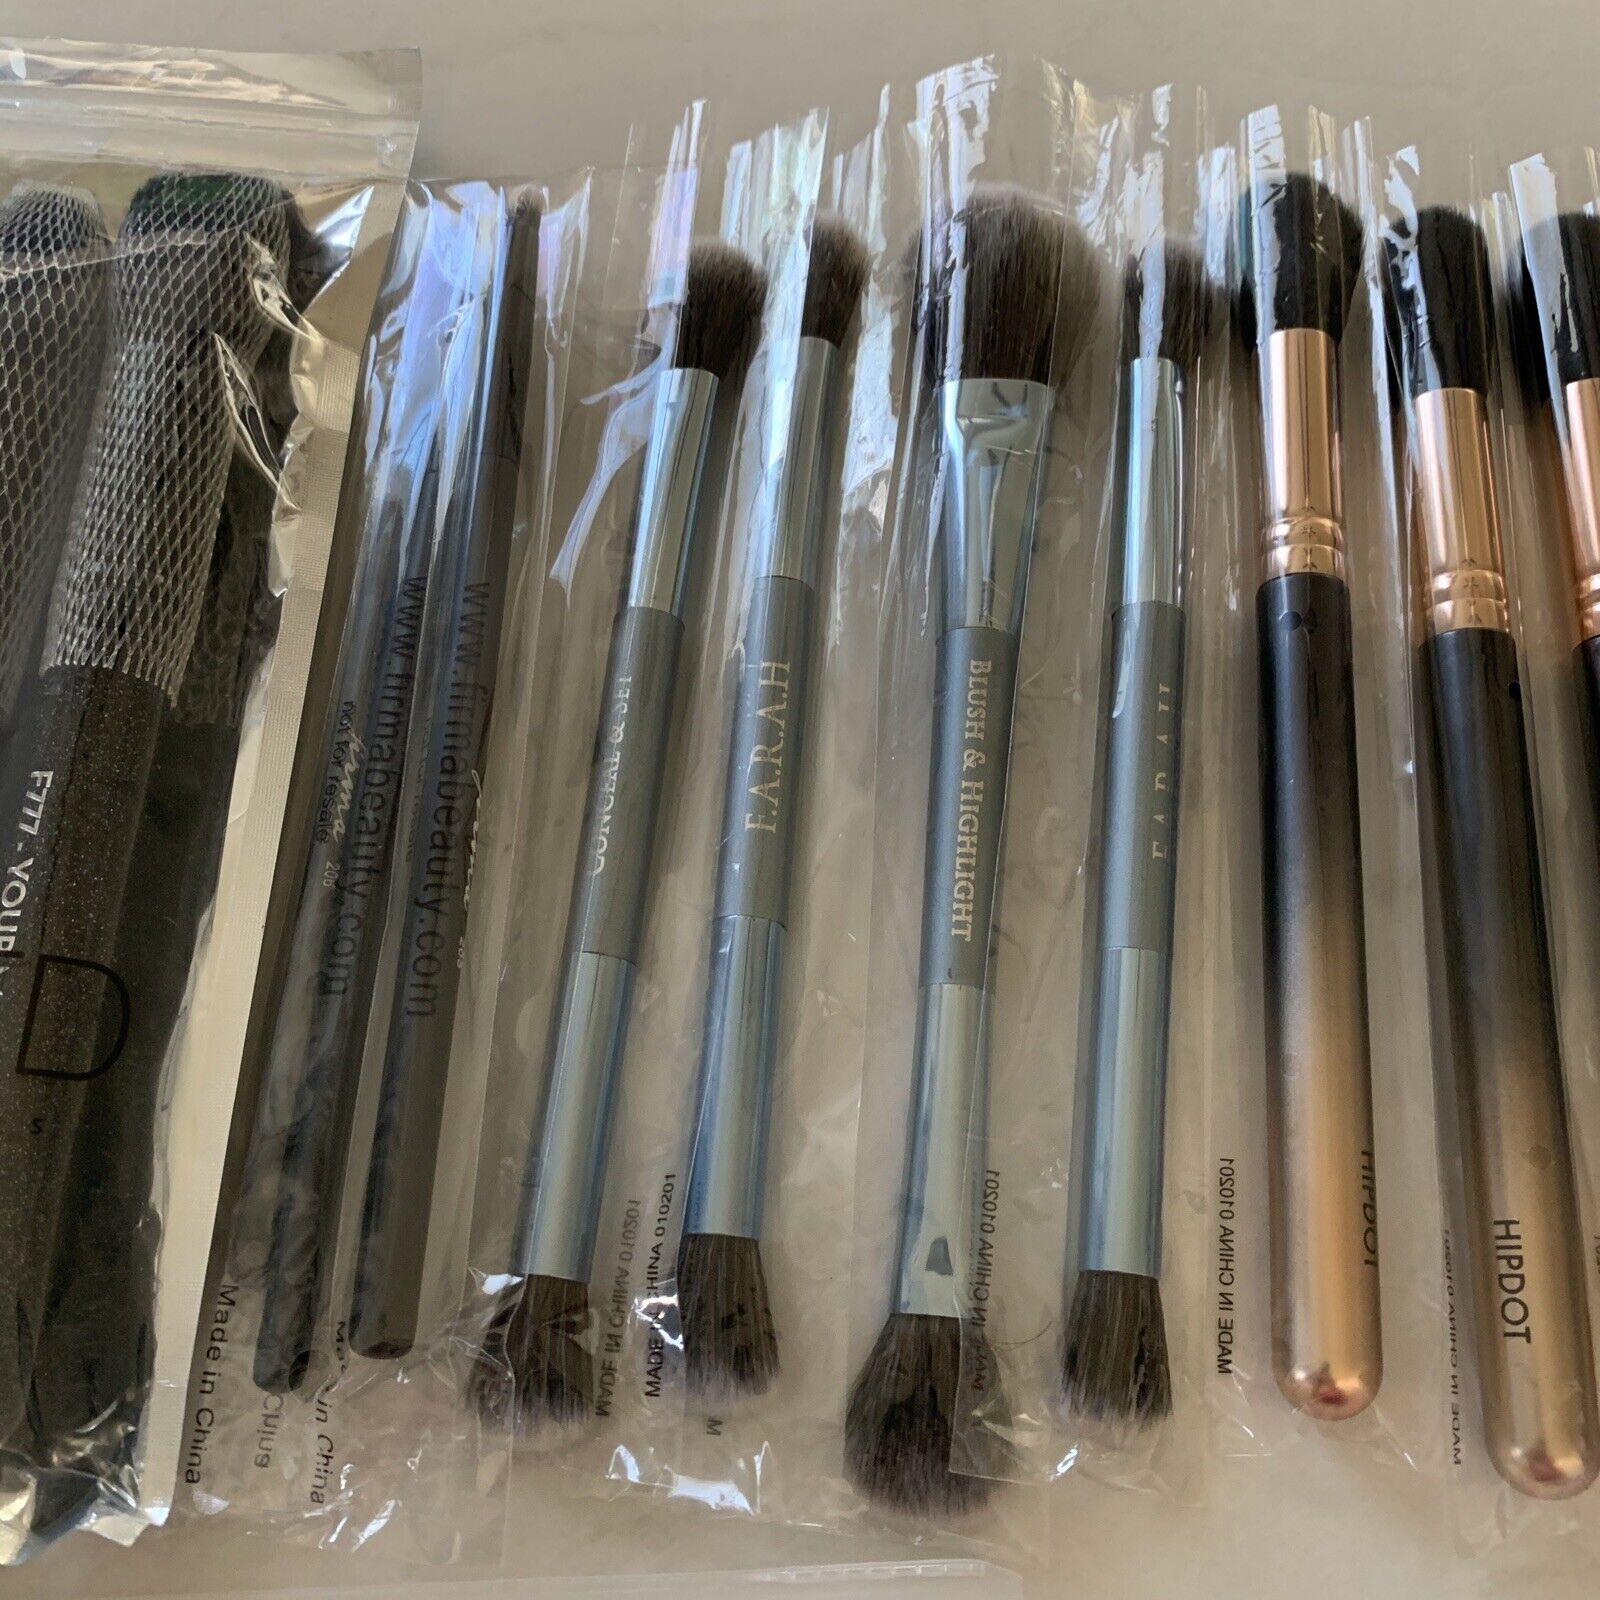 Lot of 25 Makeup Brushes Various Brands + Wholesale Resale Stock Up Gifts  *B19 Unbranded Makeup Brushes - фотография #4